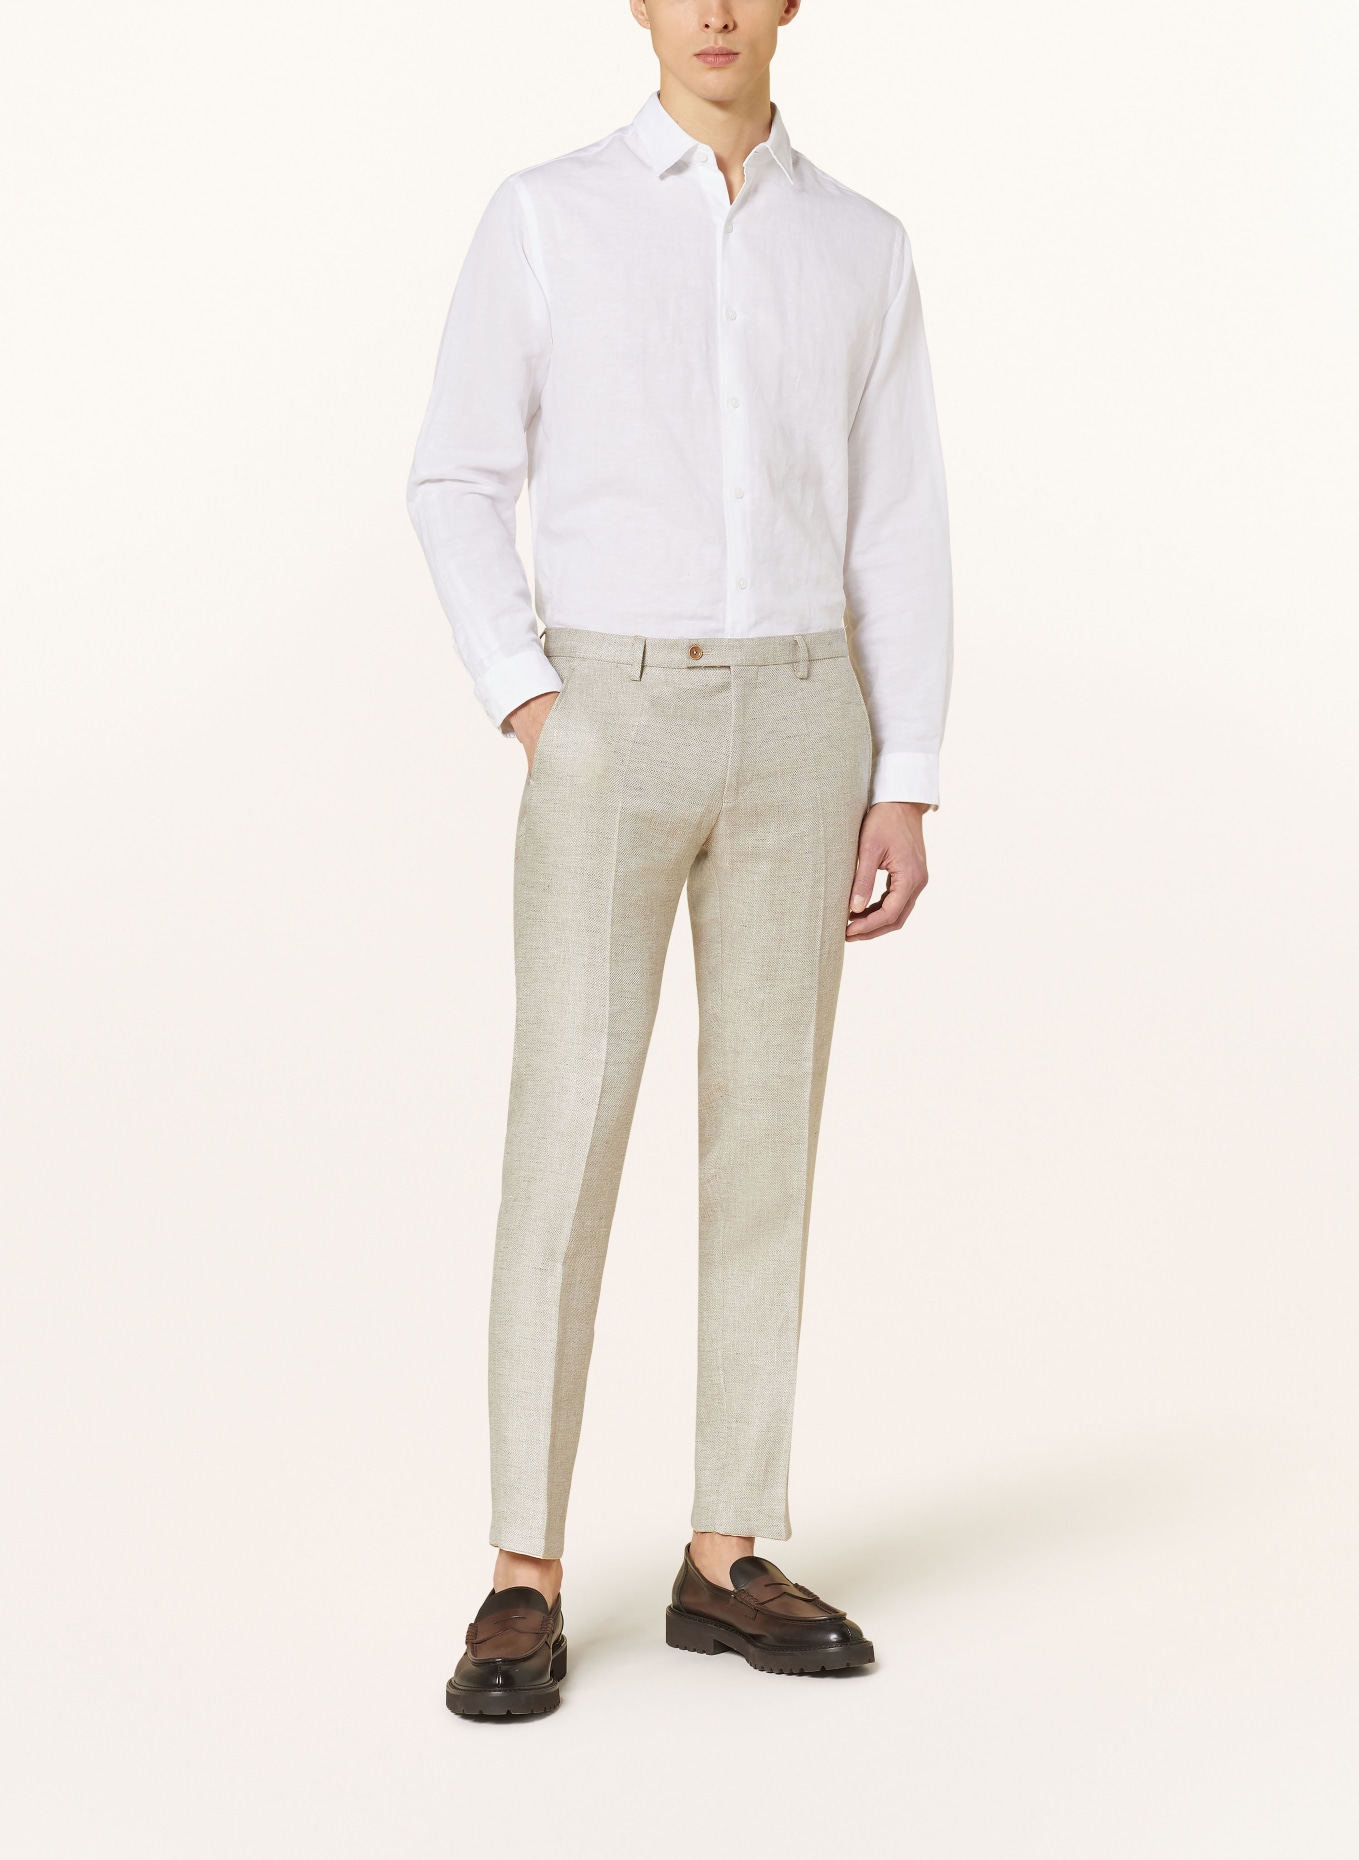 CG - CLUB of GENTS Suit trousers CG PACO slim fit with linen, Color: 21 beige hell (Image 3)